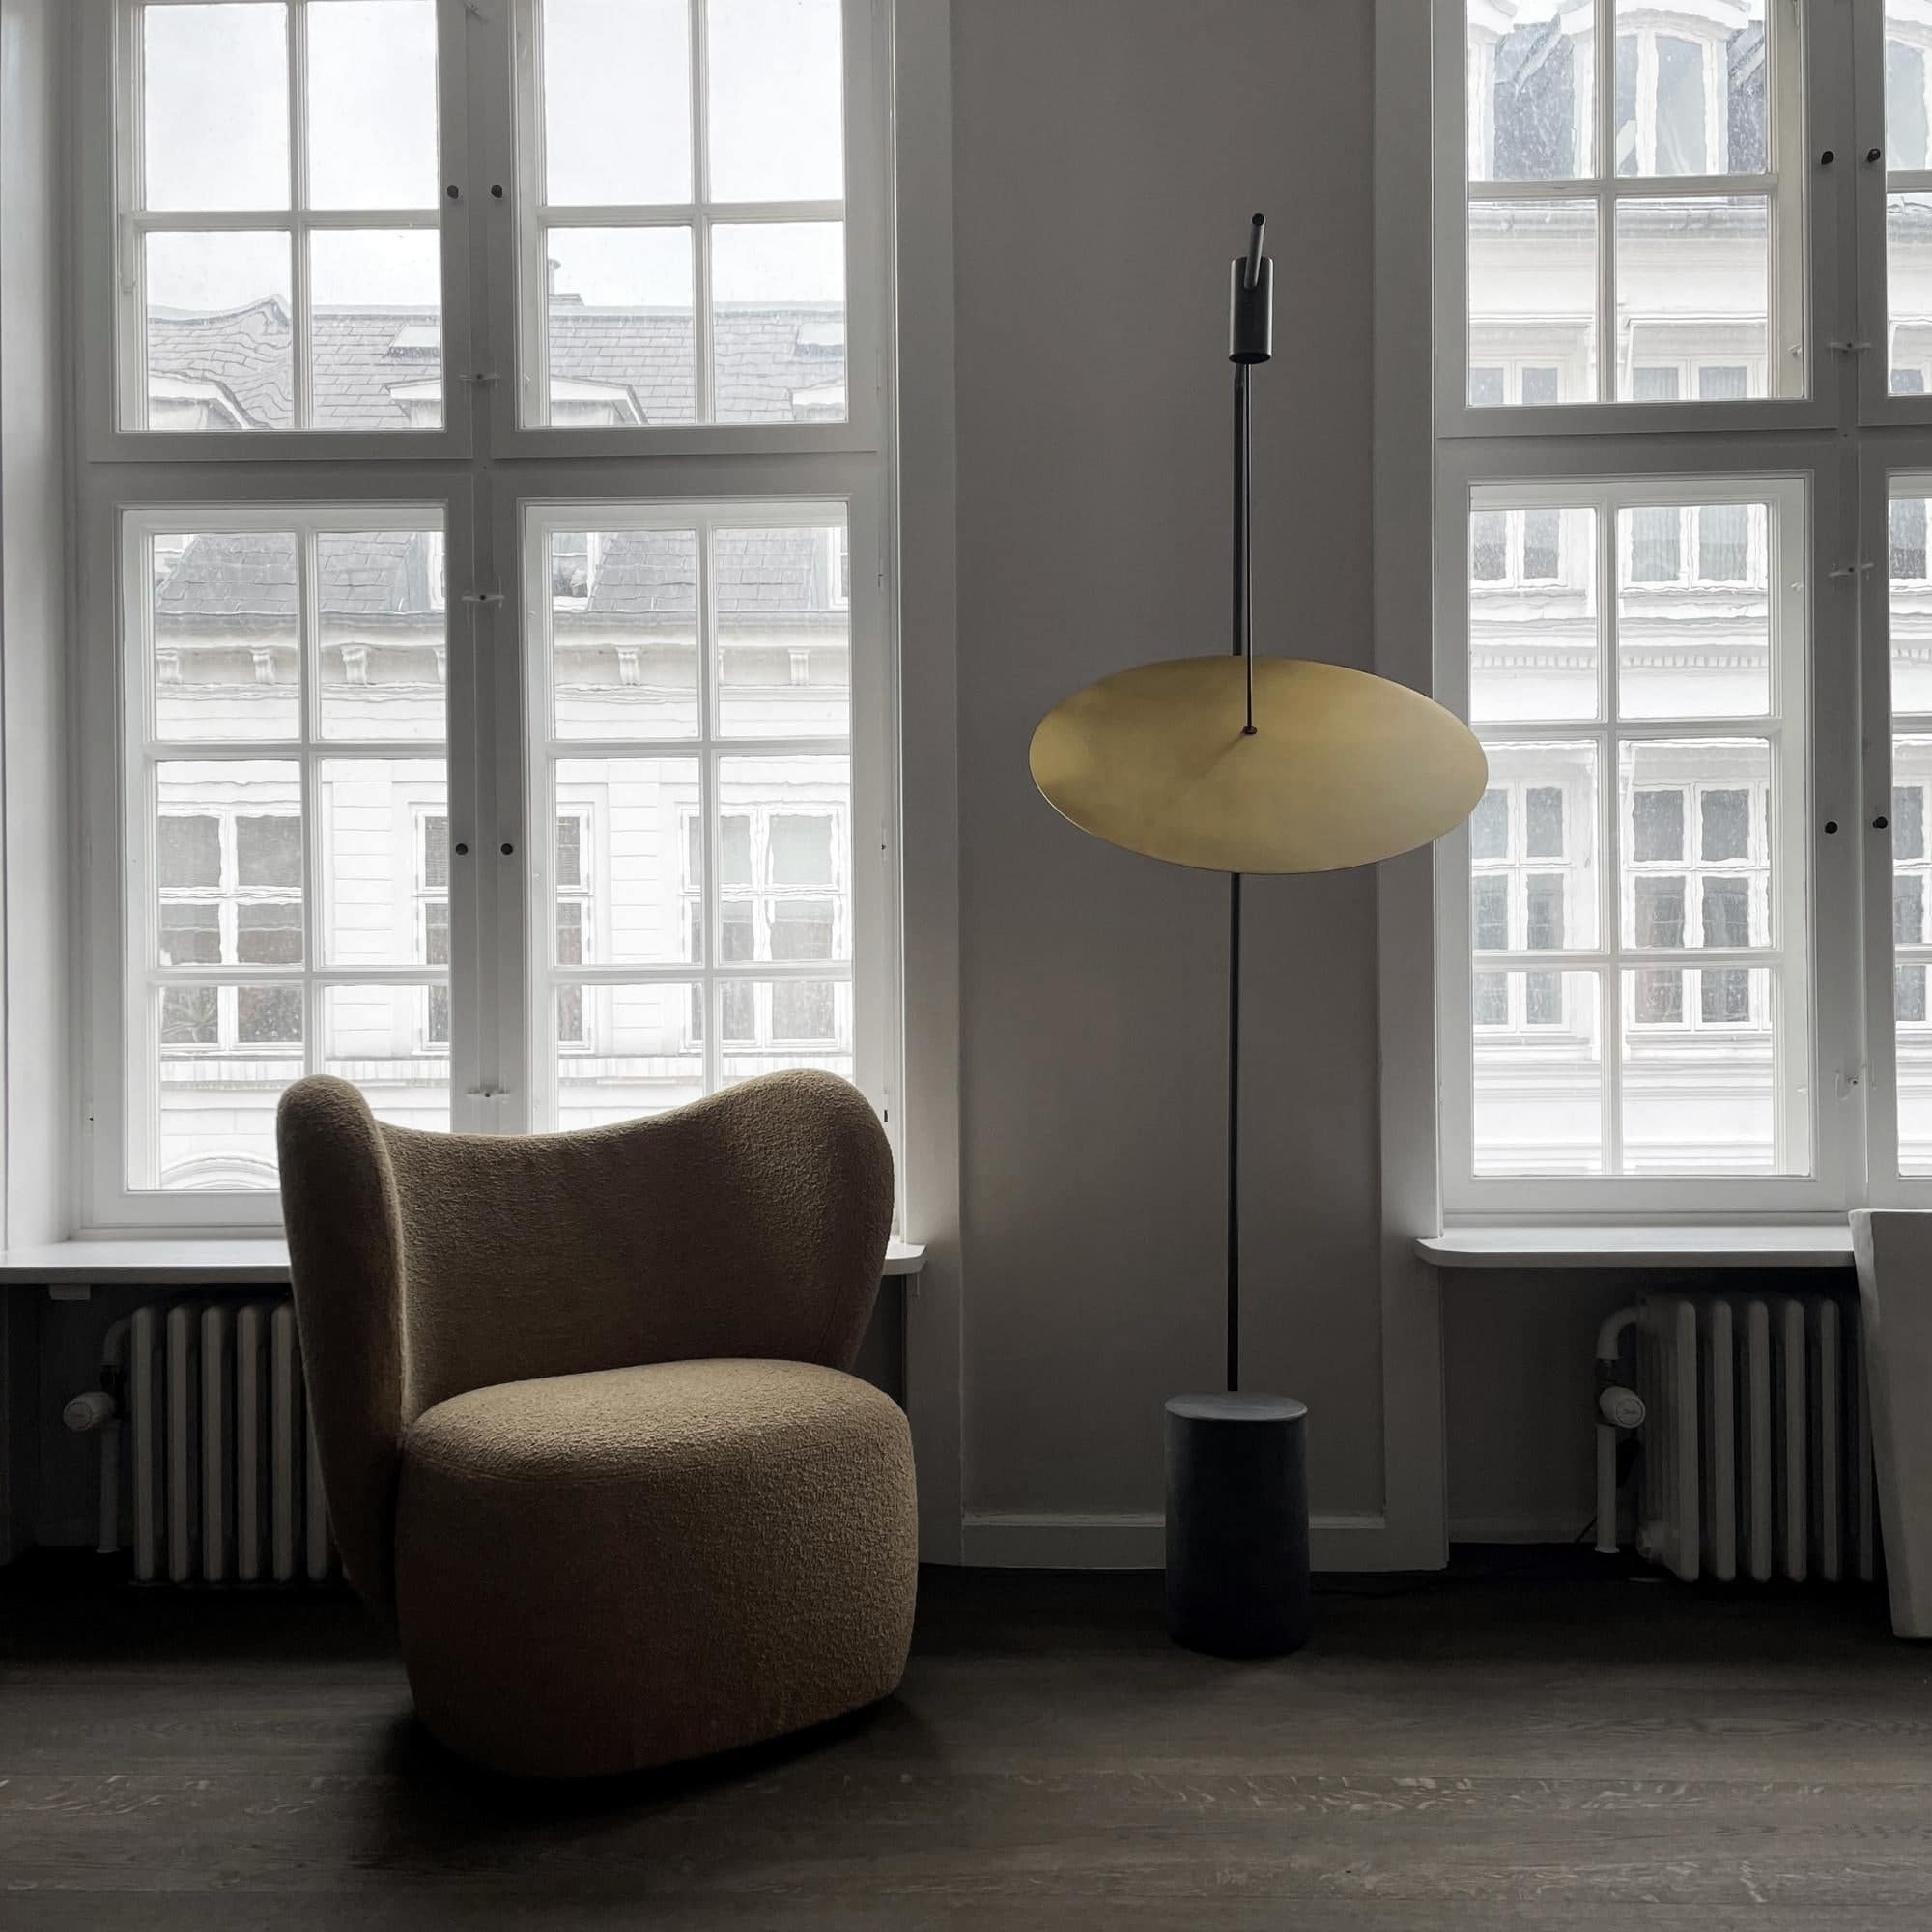 The Moon Floor Lamp - THAT COOL LIVING